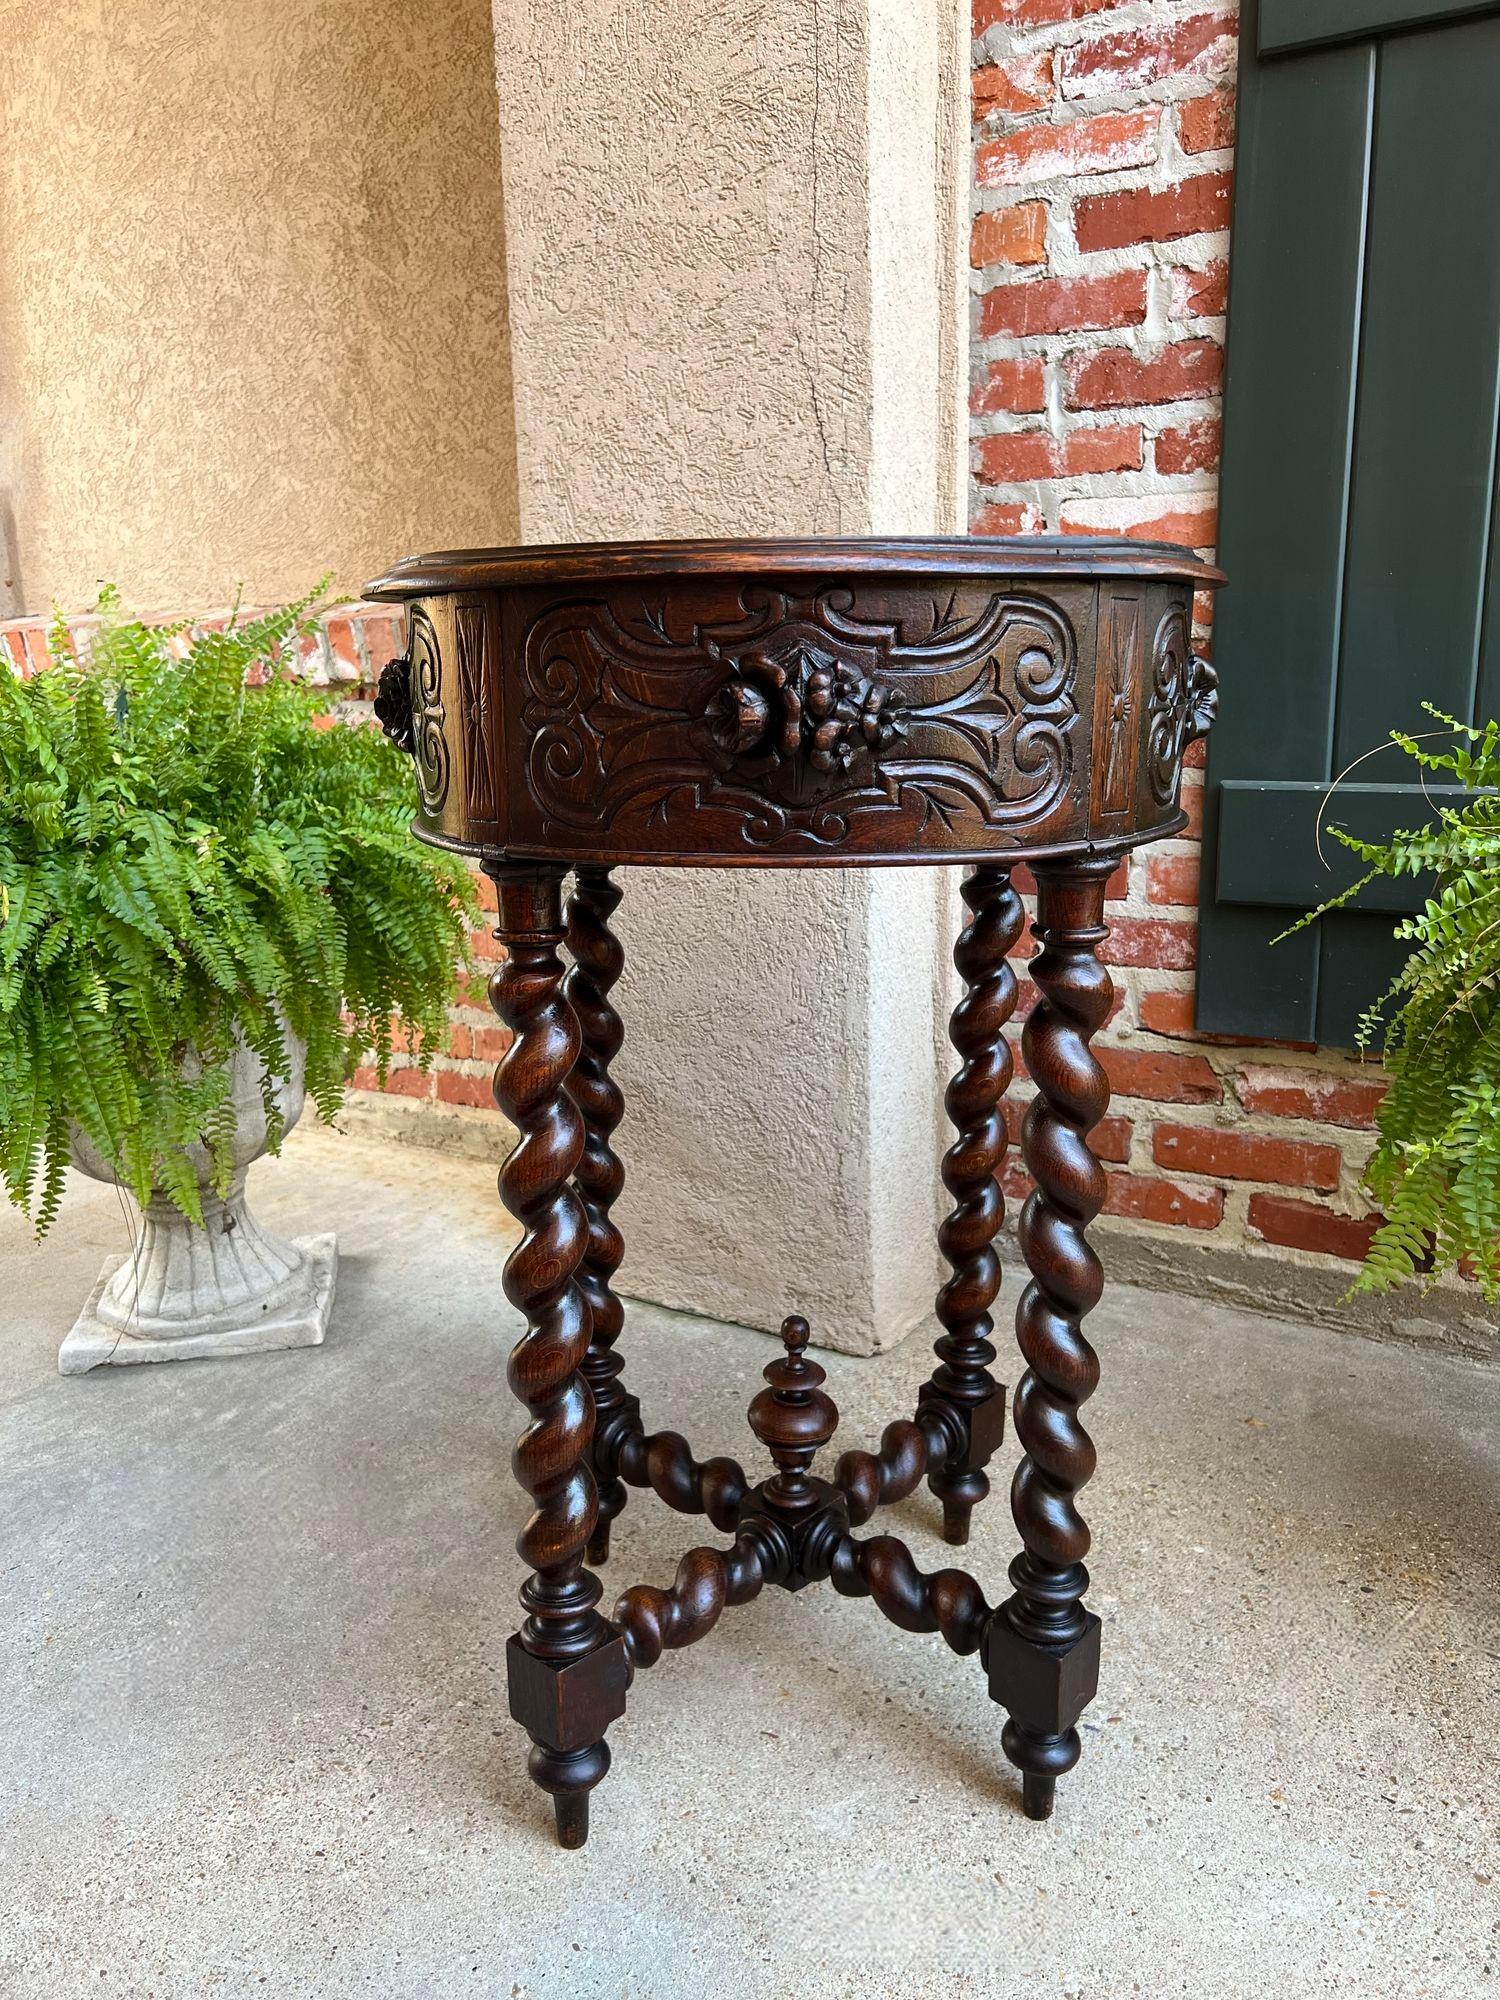 Small Antique French ROUND Center Side TABLE Barley Twist Renaissance Carved Oak.

Direct from France, this SUPER PETITE size round side table, ornately adorned, with an impressive silhouette and design. The beveled edge round oak top and apron are